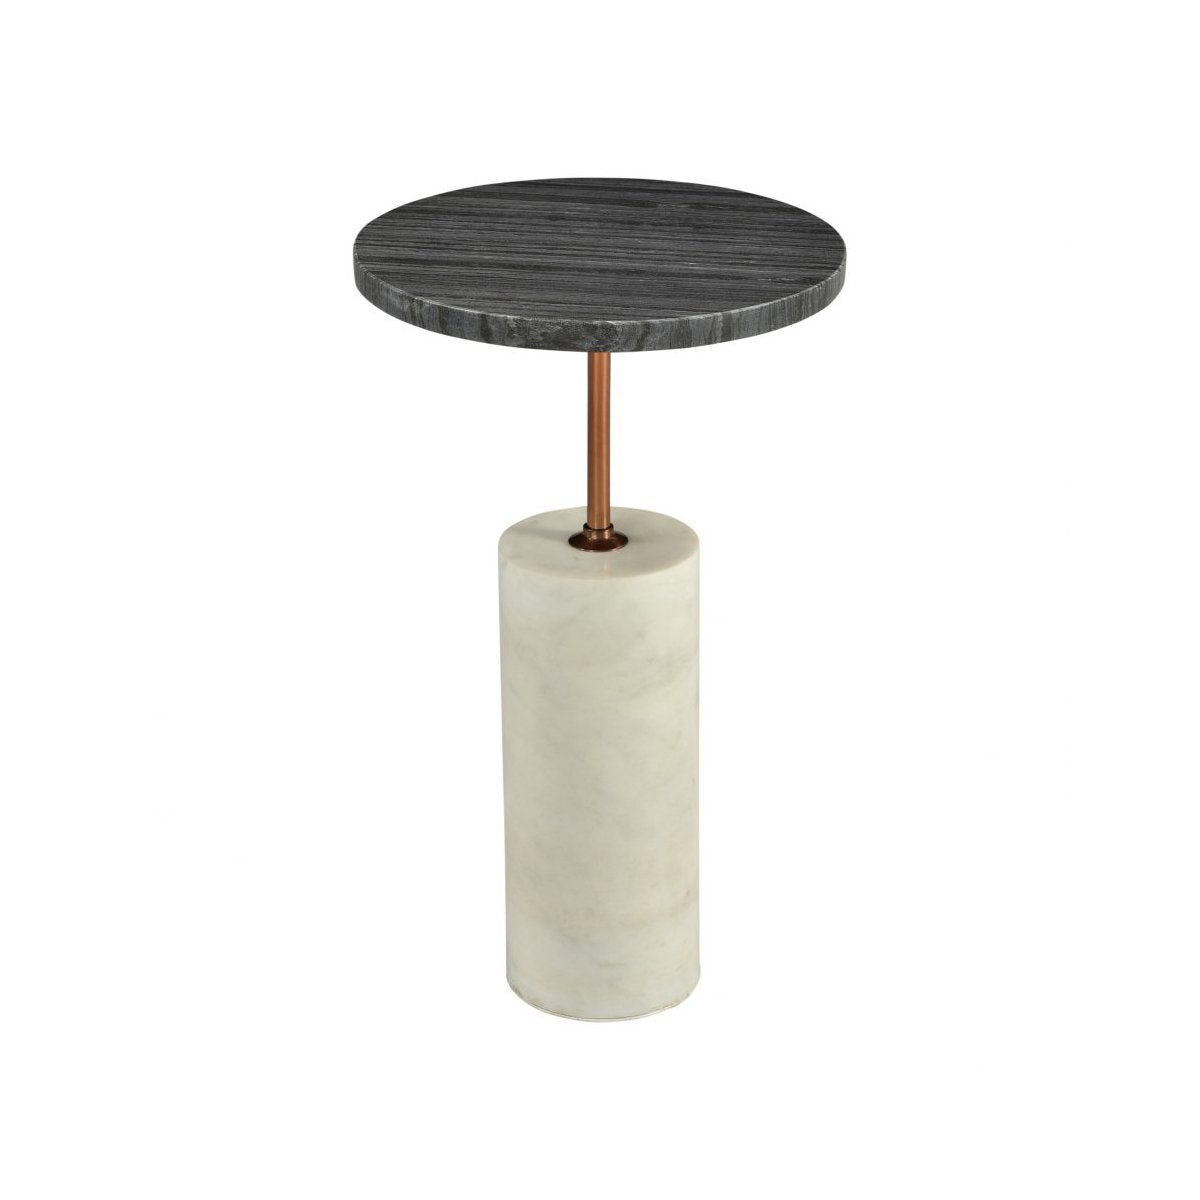 Load image into Gallery viewer, Dusk Accent Table Accent Tables Moe&amp;#39;s     Four Hands, Burke Decor, Mid Century Modern Furniture, Old Bones Furniture Company, Old Bones Co, Modern Mid Century, Designer Furniture, https://www.oldbonesco.com/
